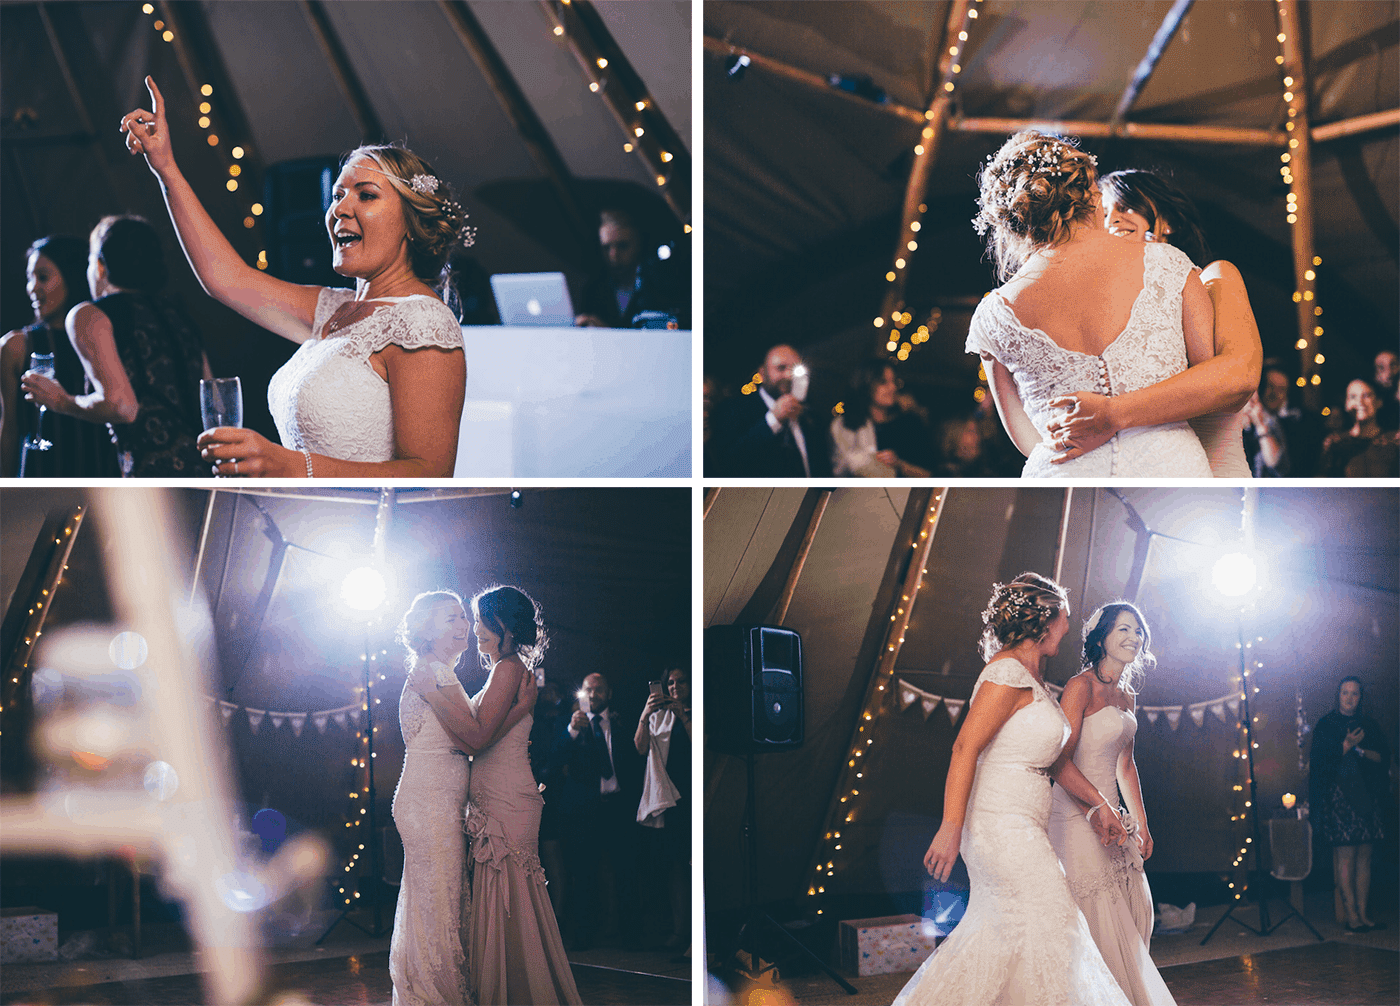 Castle Bromwich Hall Tipi Wedding | Christopher Terry Photography